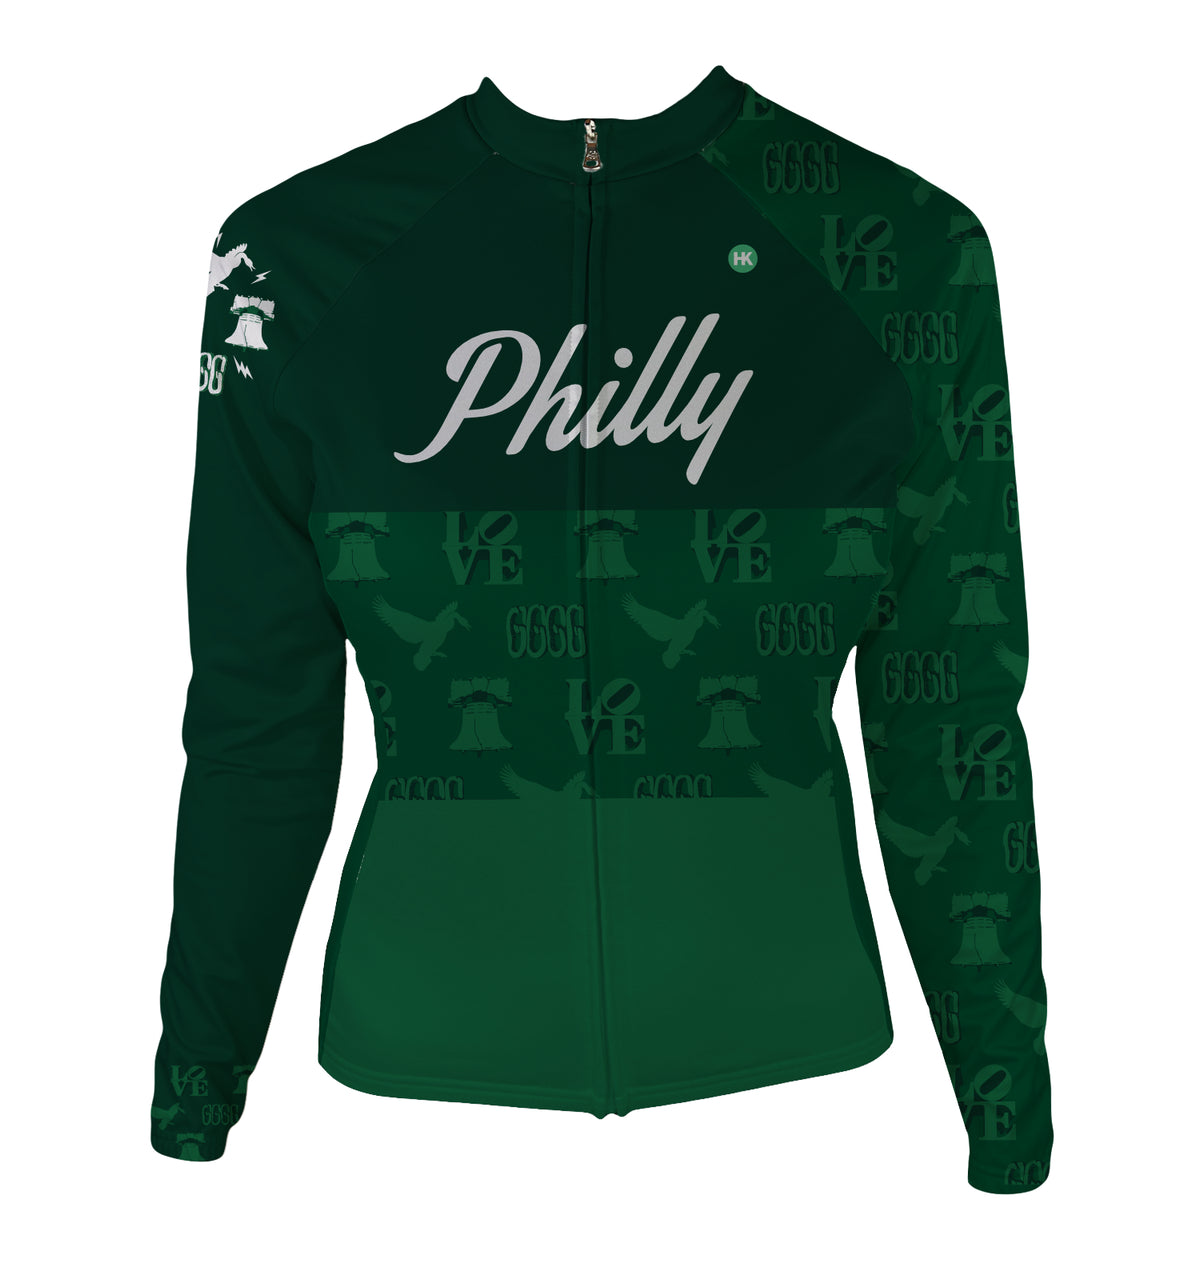 Philly Retro Blue Women's Thermal Cycling Jersey | Hill Killer X-Small / Regular / Blue